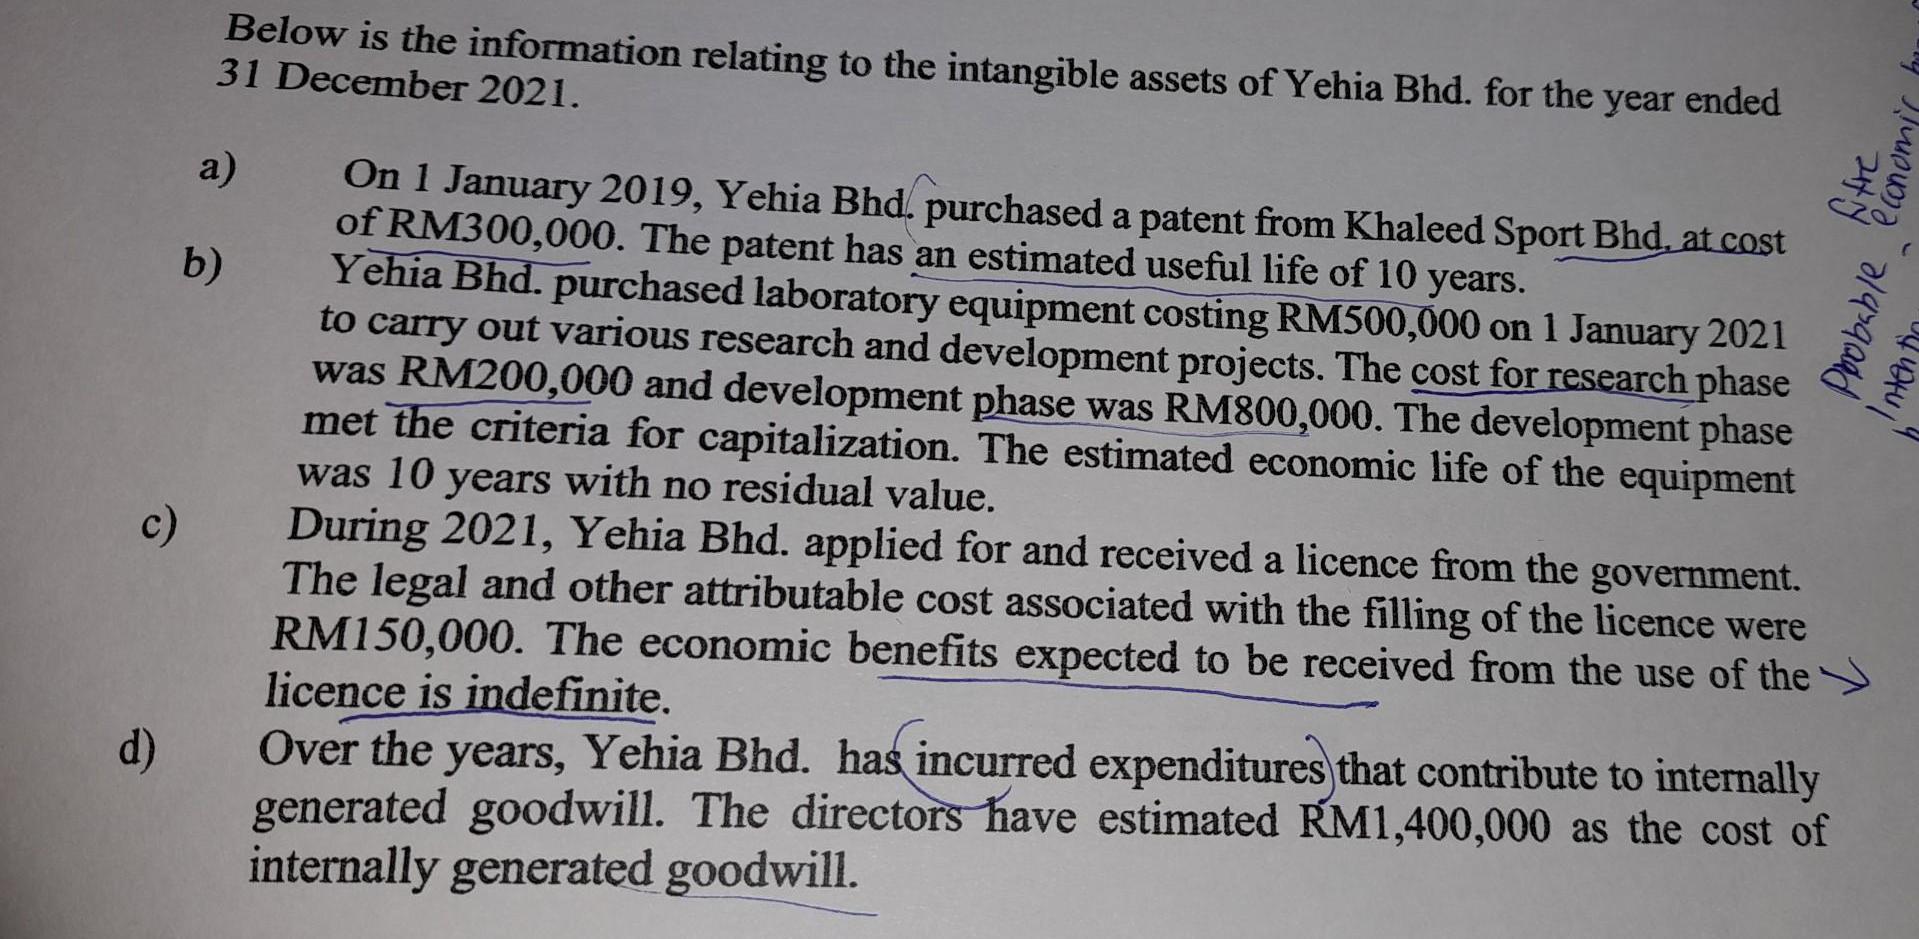 c) d) Below is the information relating to the intangible assets of Yehia Bhd. for the year ended 31 December